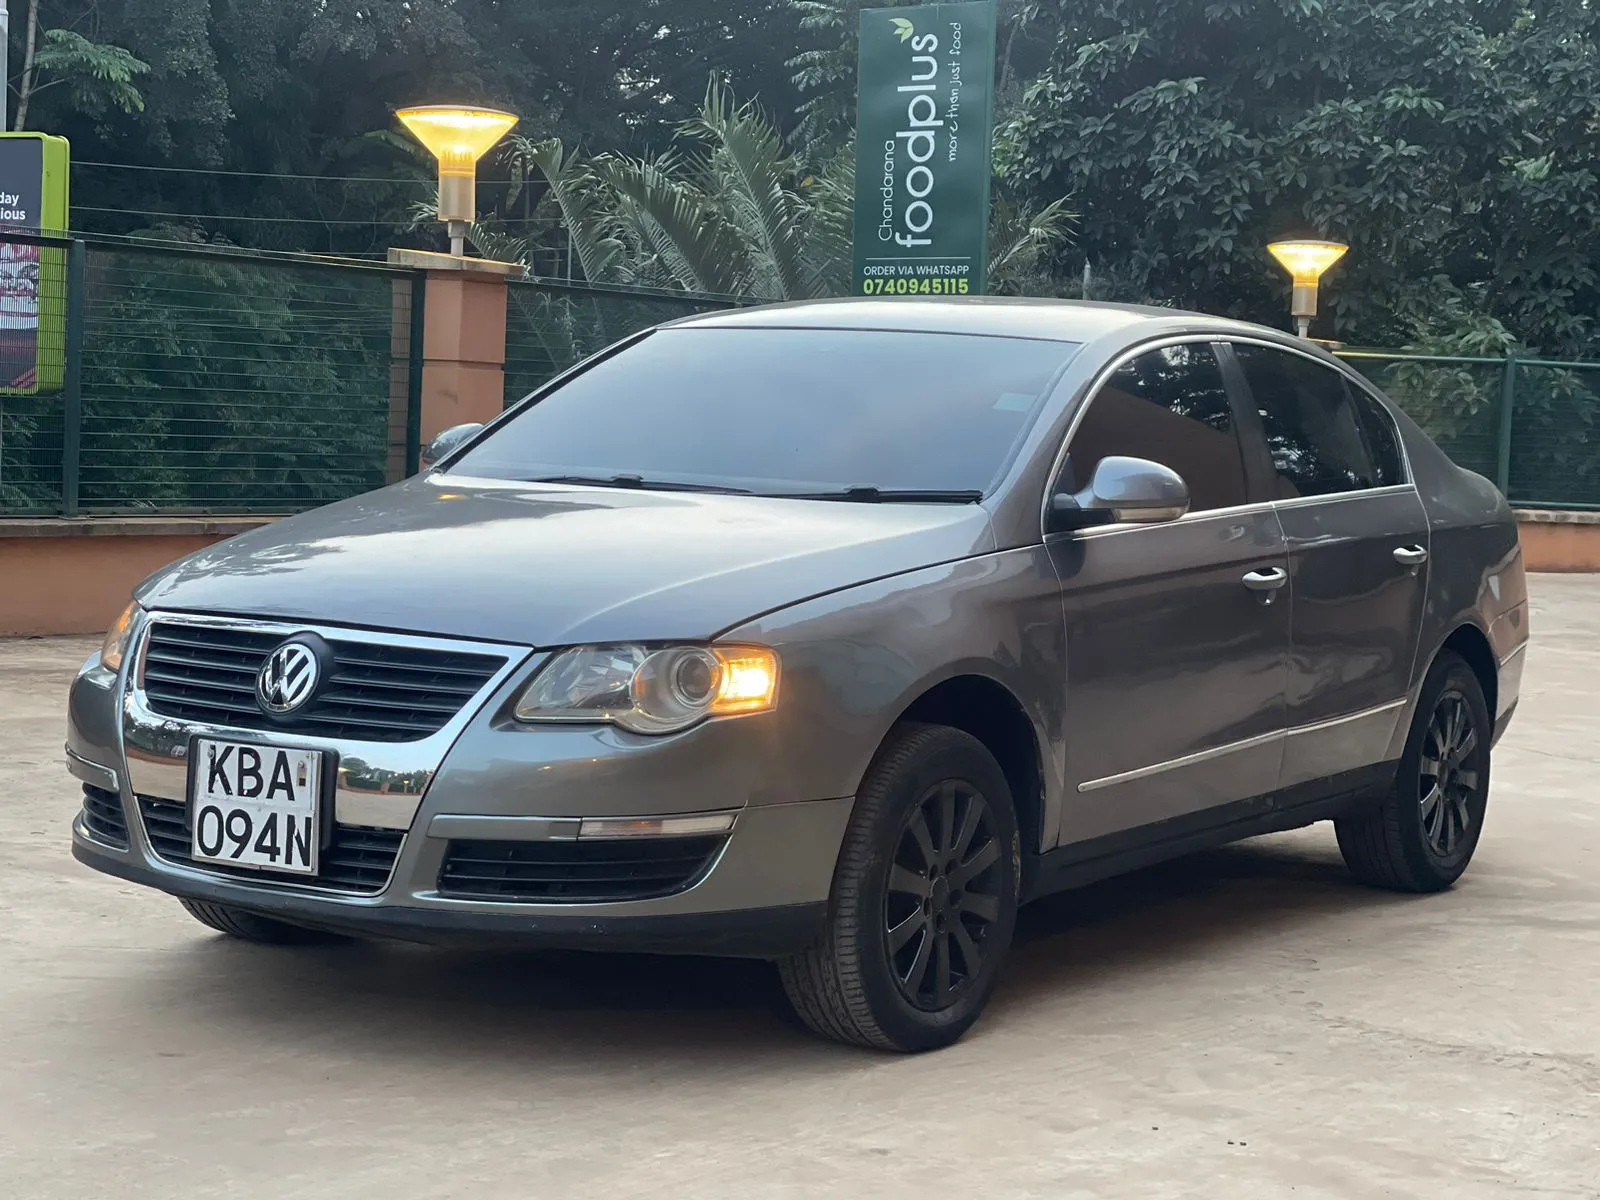 Volkswagen Passat vw 🔥 Cheapest You Pay 30% DEPOSIT Trade in OK EXCLUSIVE